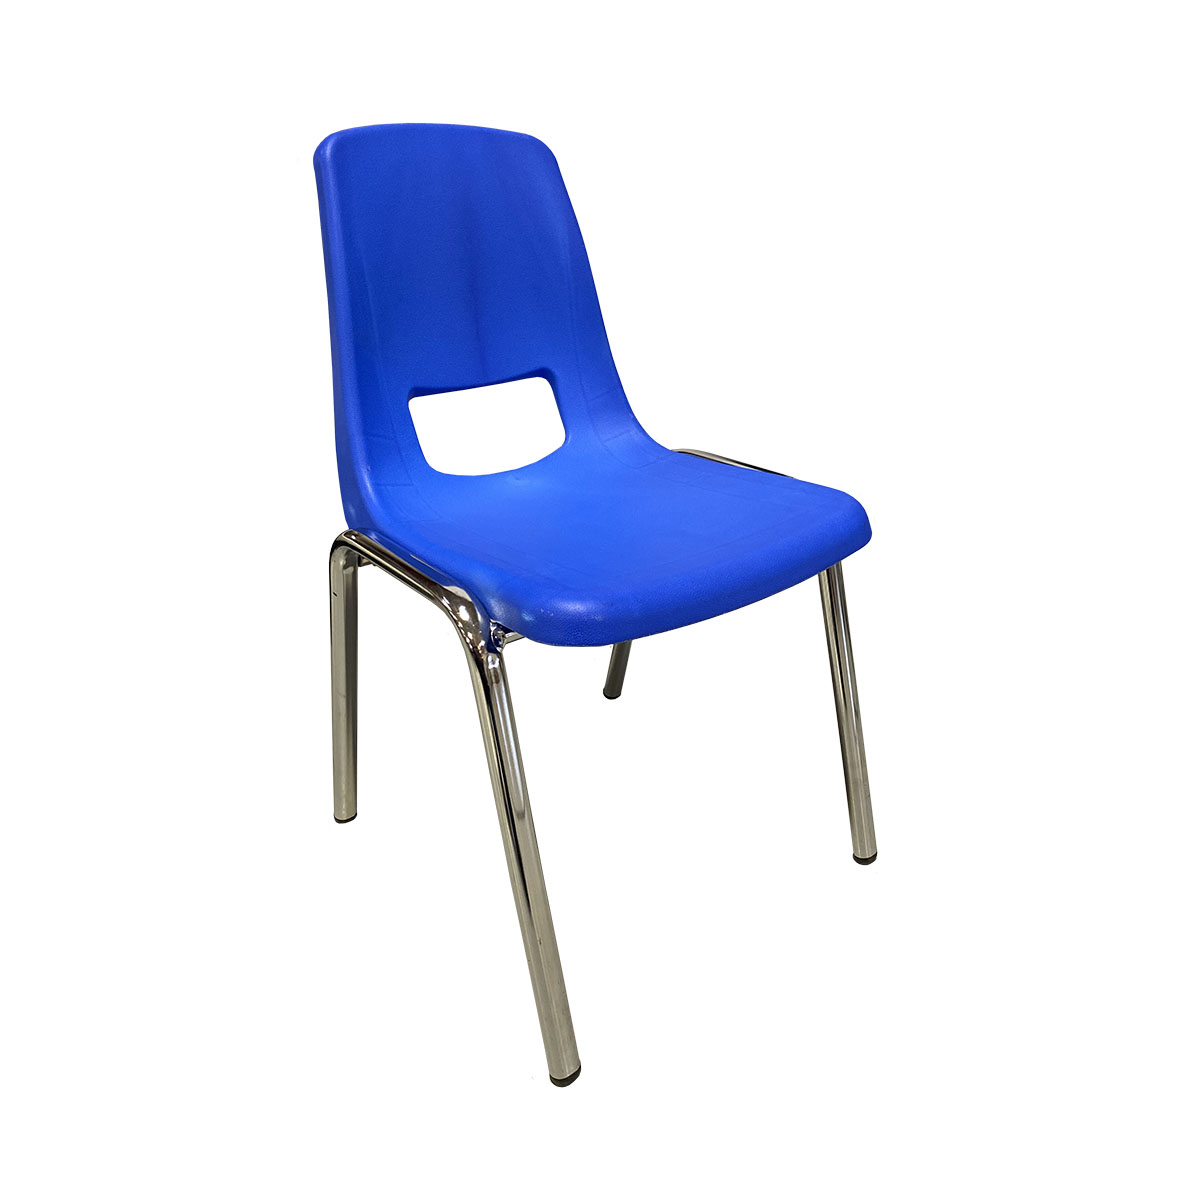 Chair Blue Seat Chrome Leg Stacking Child Size 14